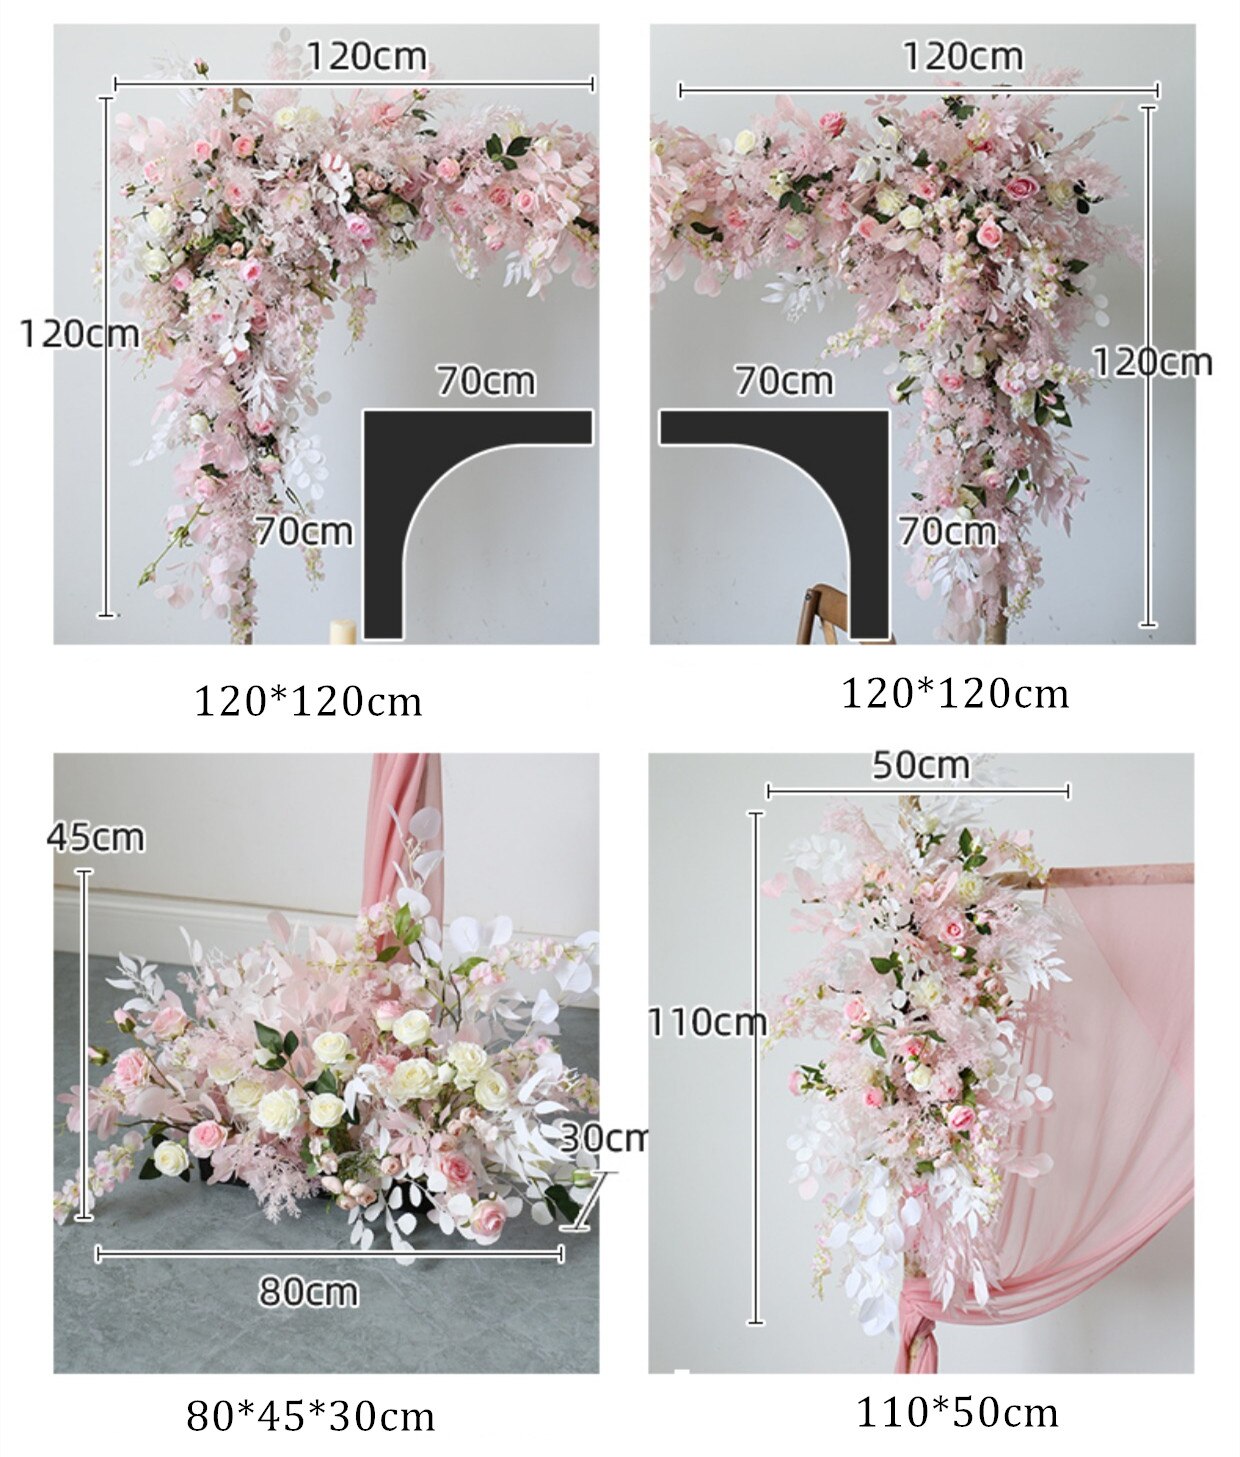 Step-by-step instructions for creating flower balls